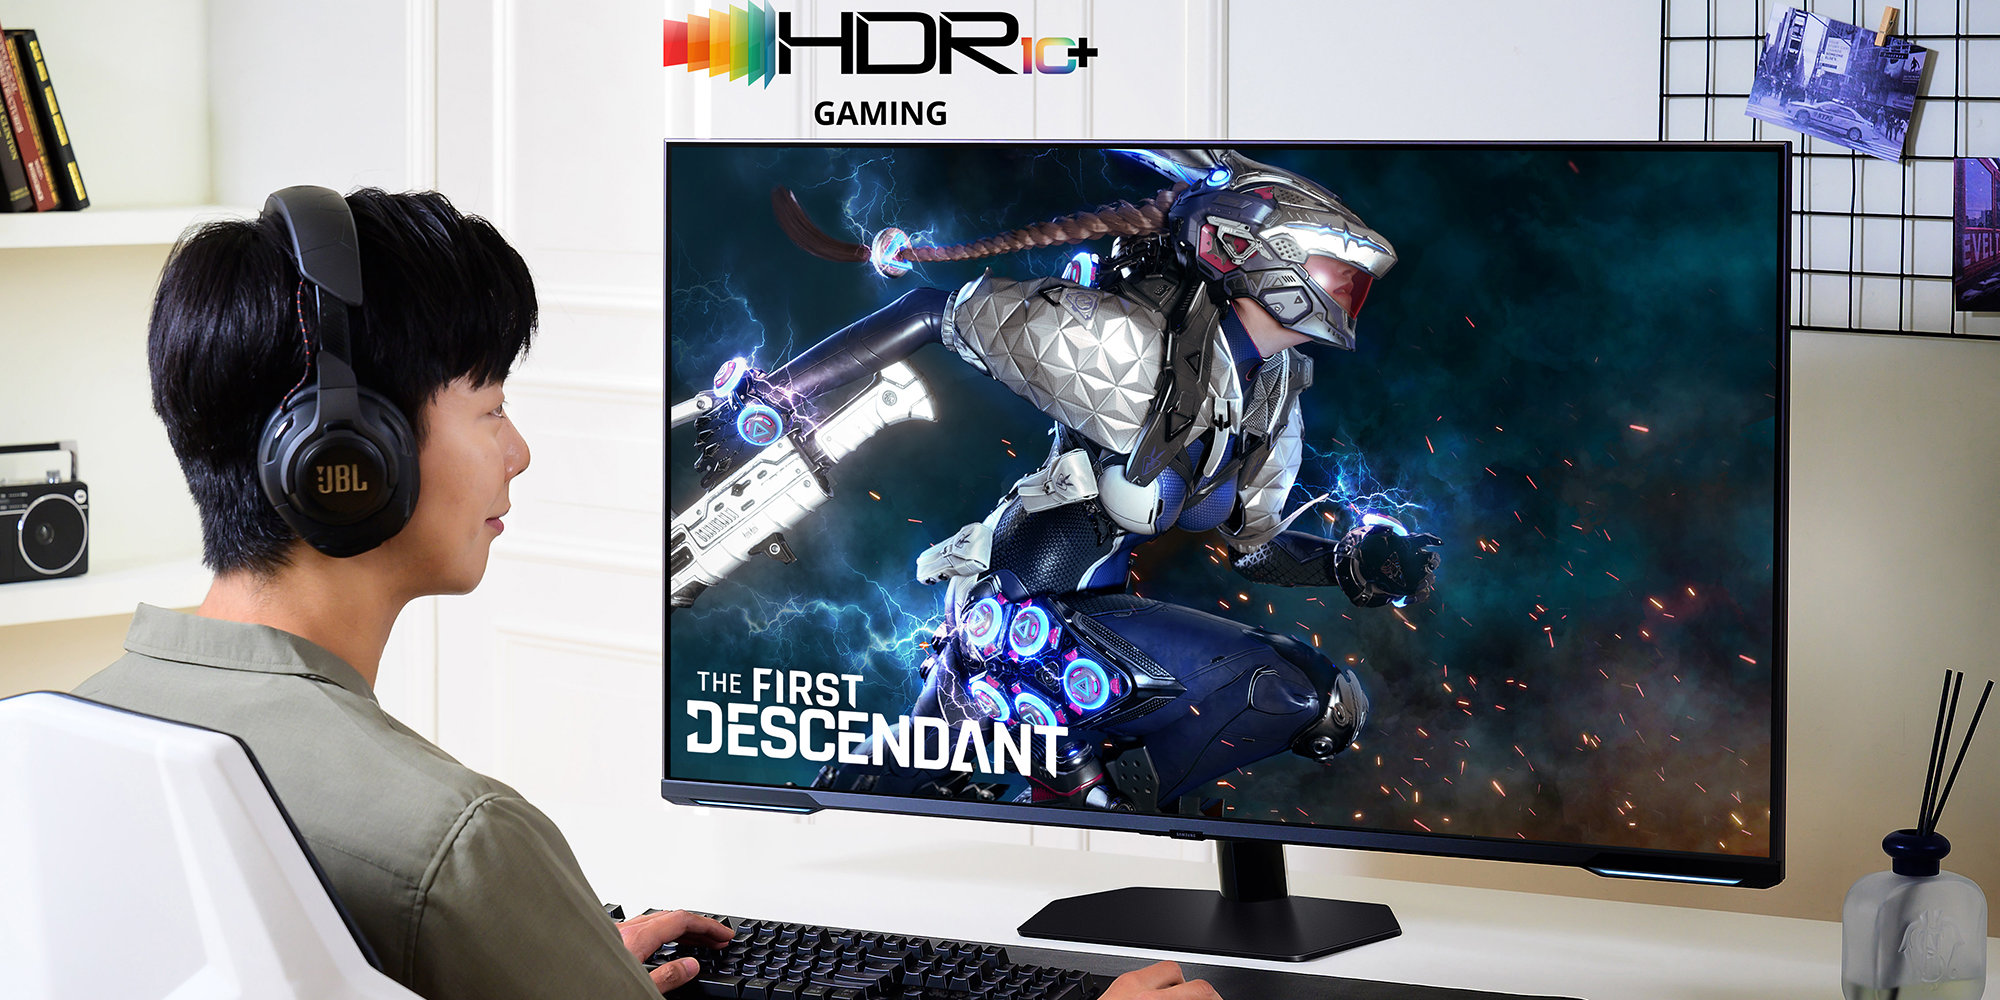 HDR10 + Gaming: “The First Descendant” is the first game in the world with this feature